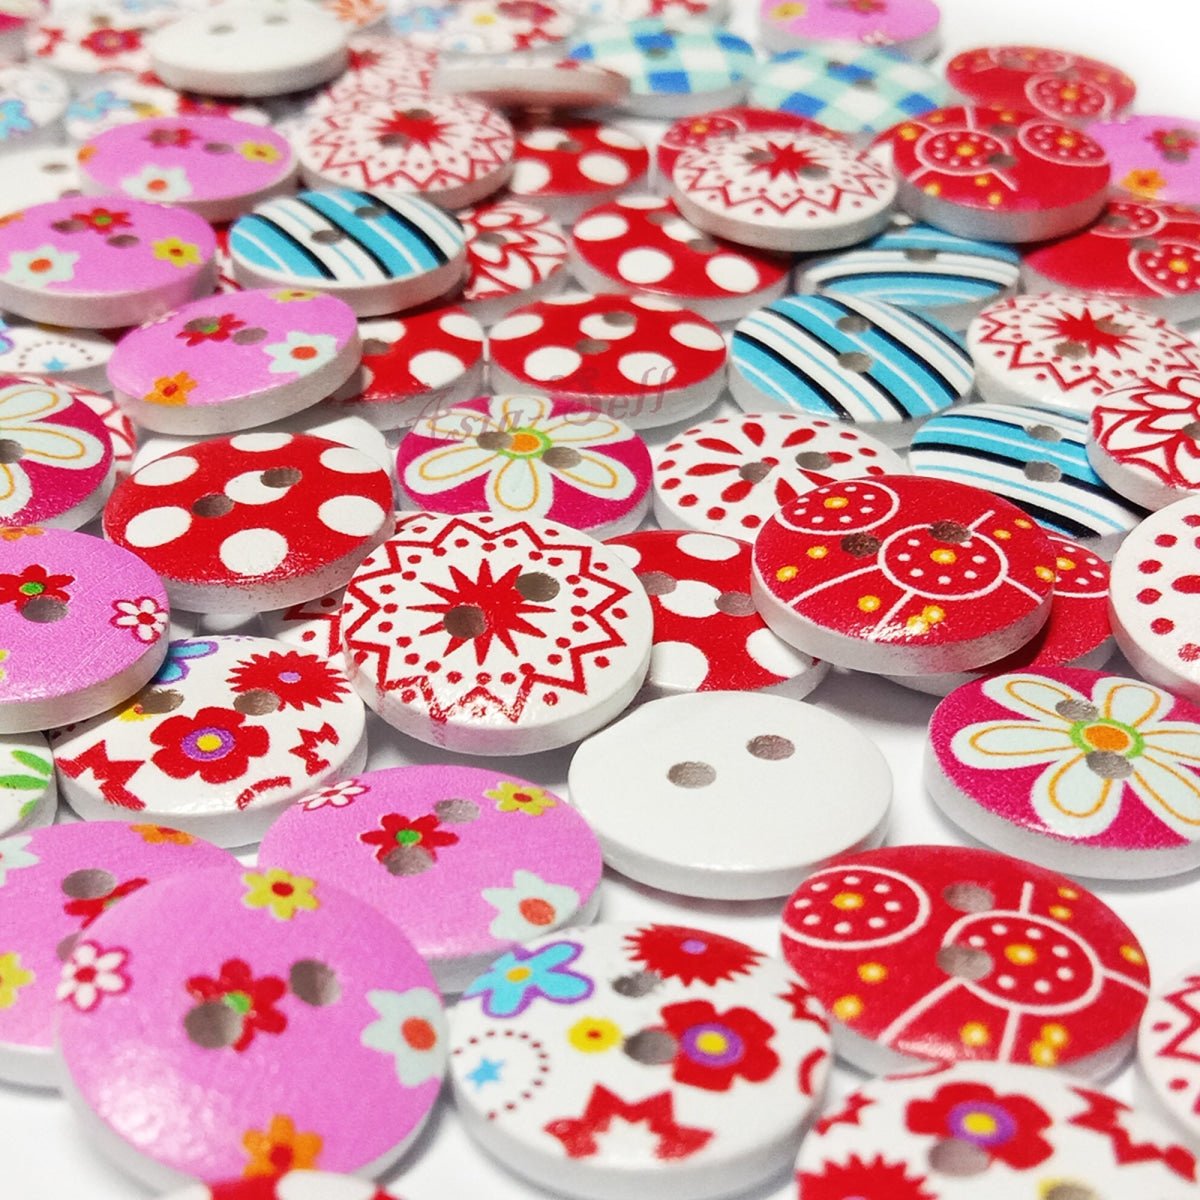 100pcs Mixed Wooden Buttons Flower for Clothing Craft Sewing DIY 2 Hole 15mm - Flowers 2 - - Asia Sell